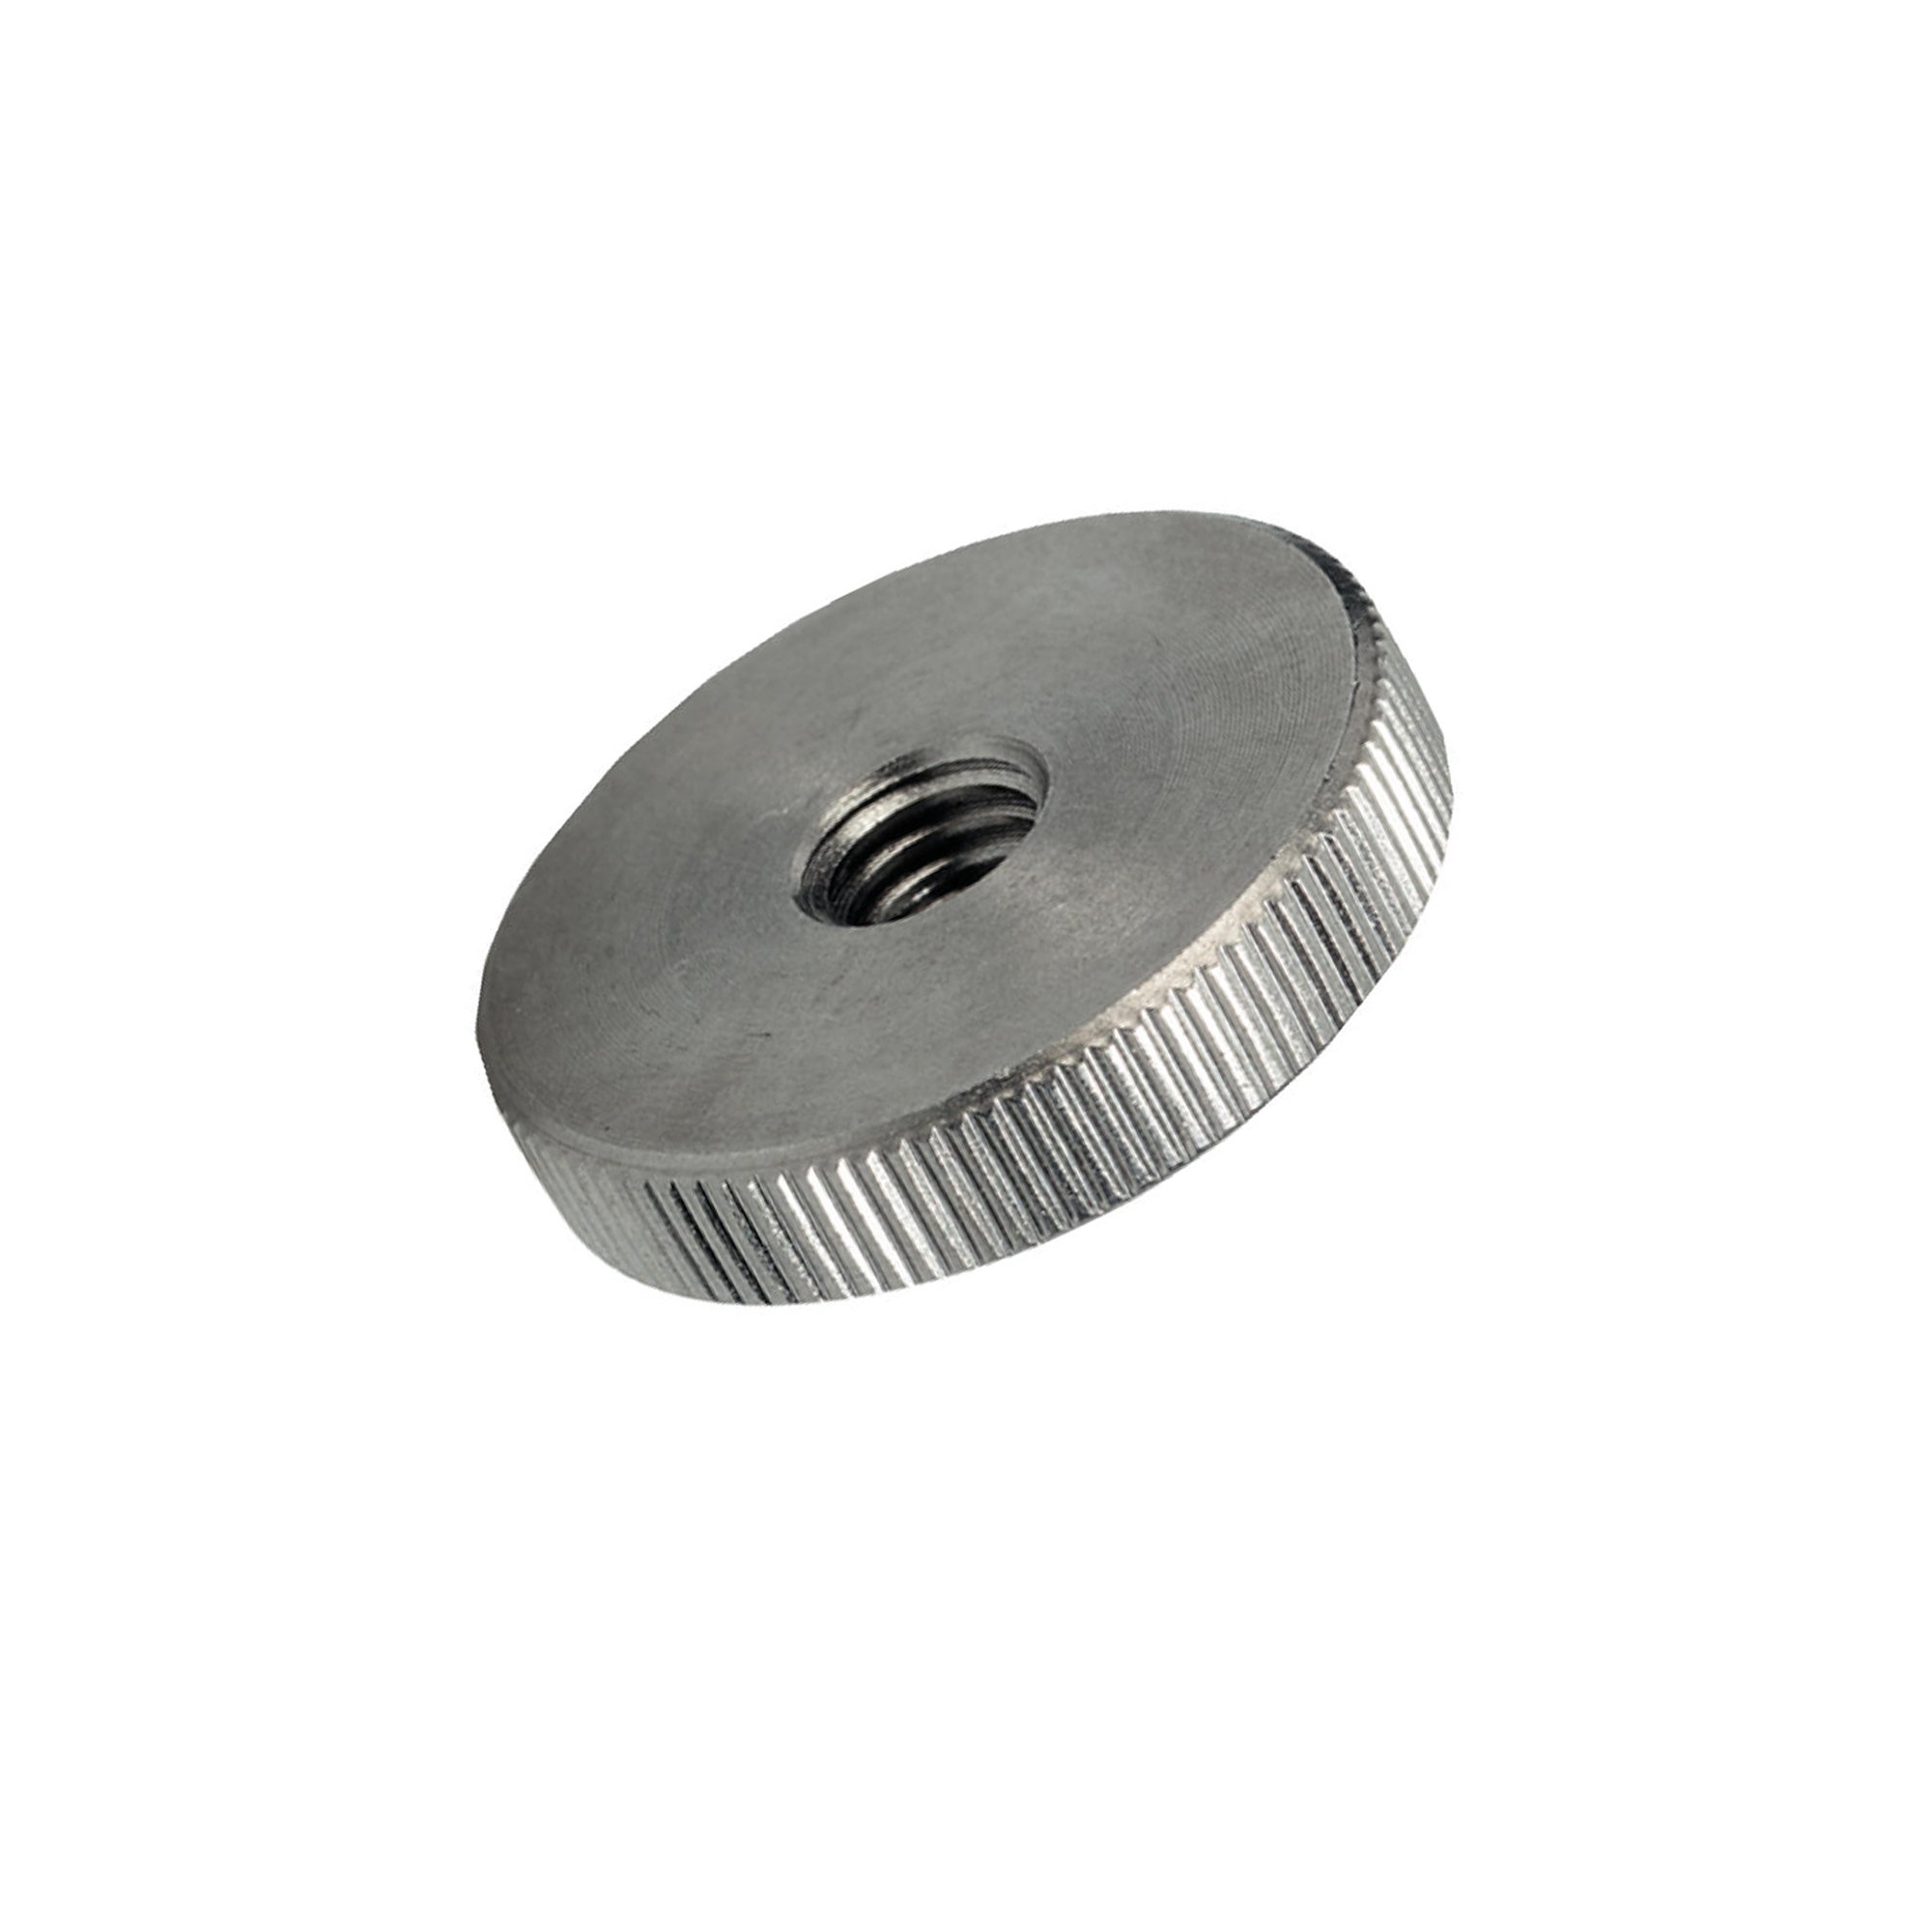 M8 Knurled Thumb Nut Thin Type Stainless A1 Grip Knob DIN 467 